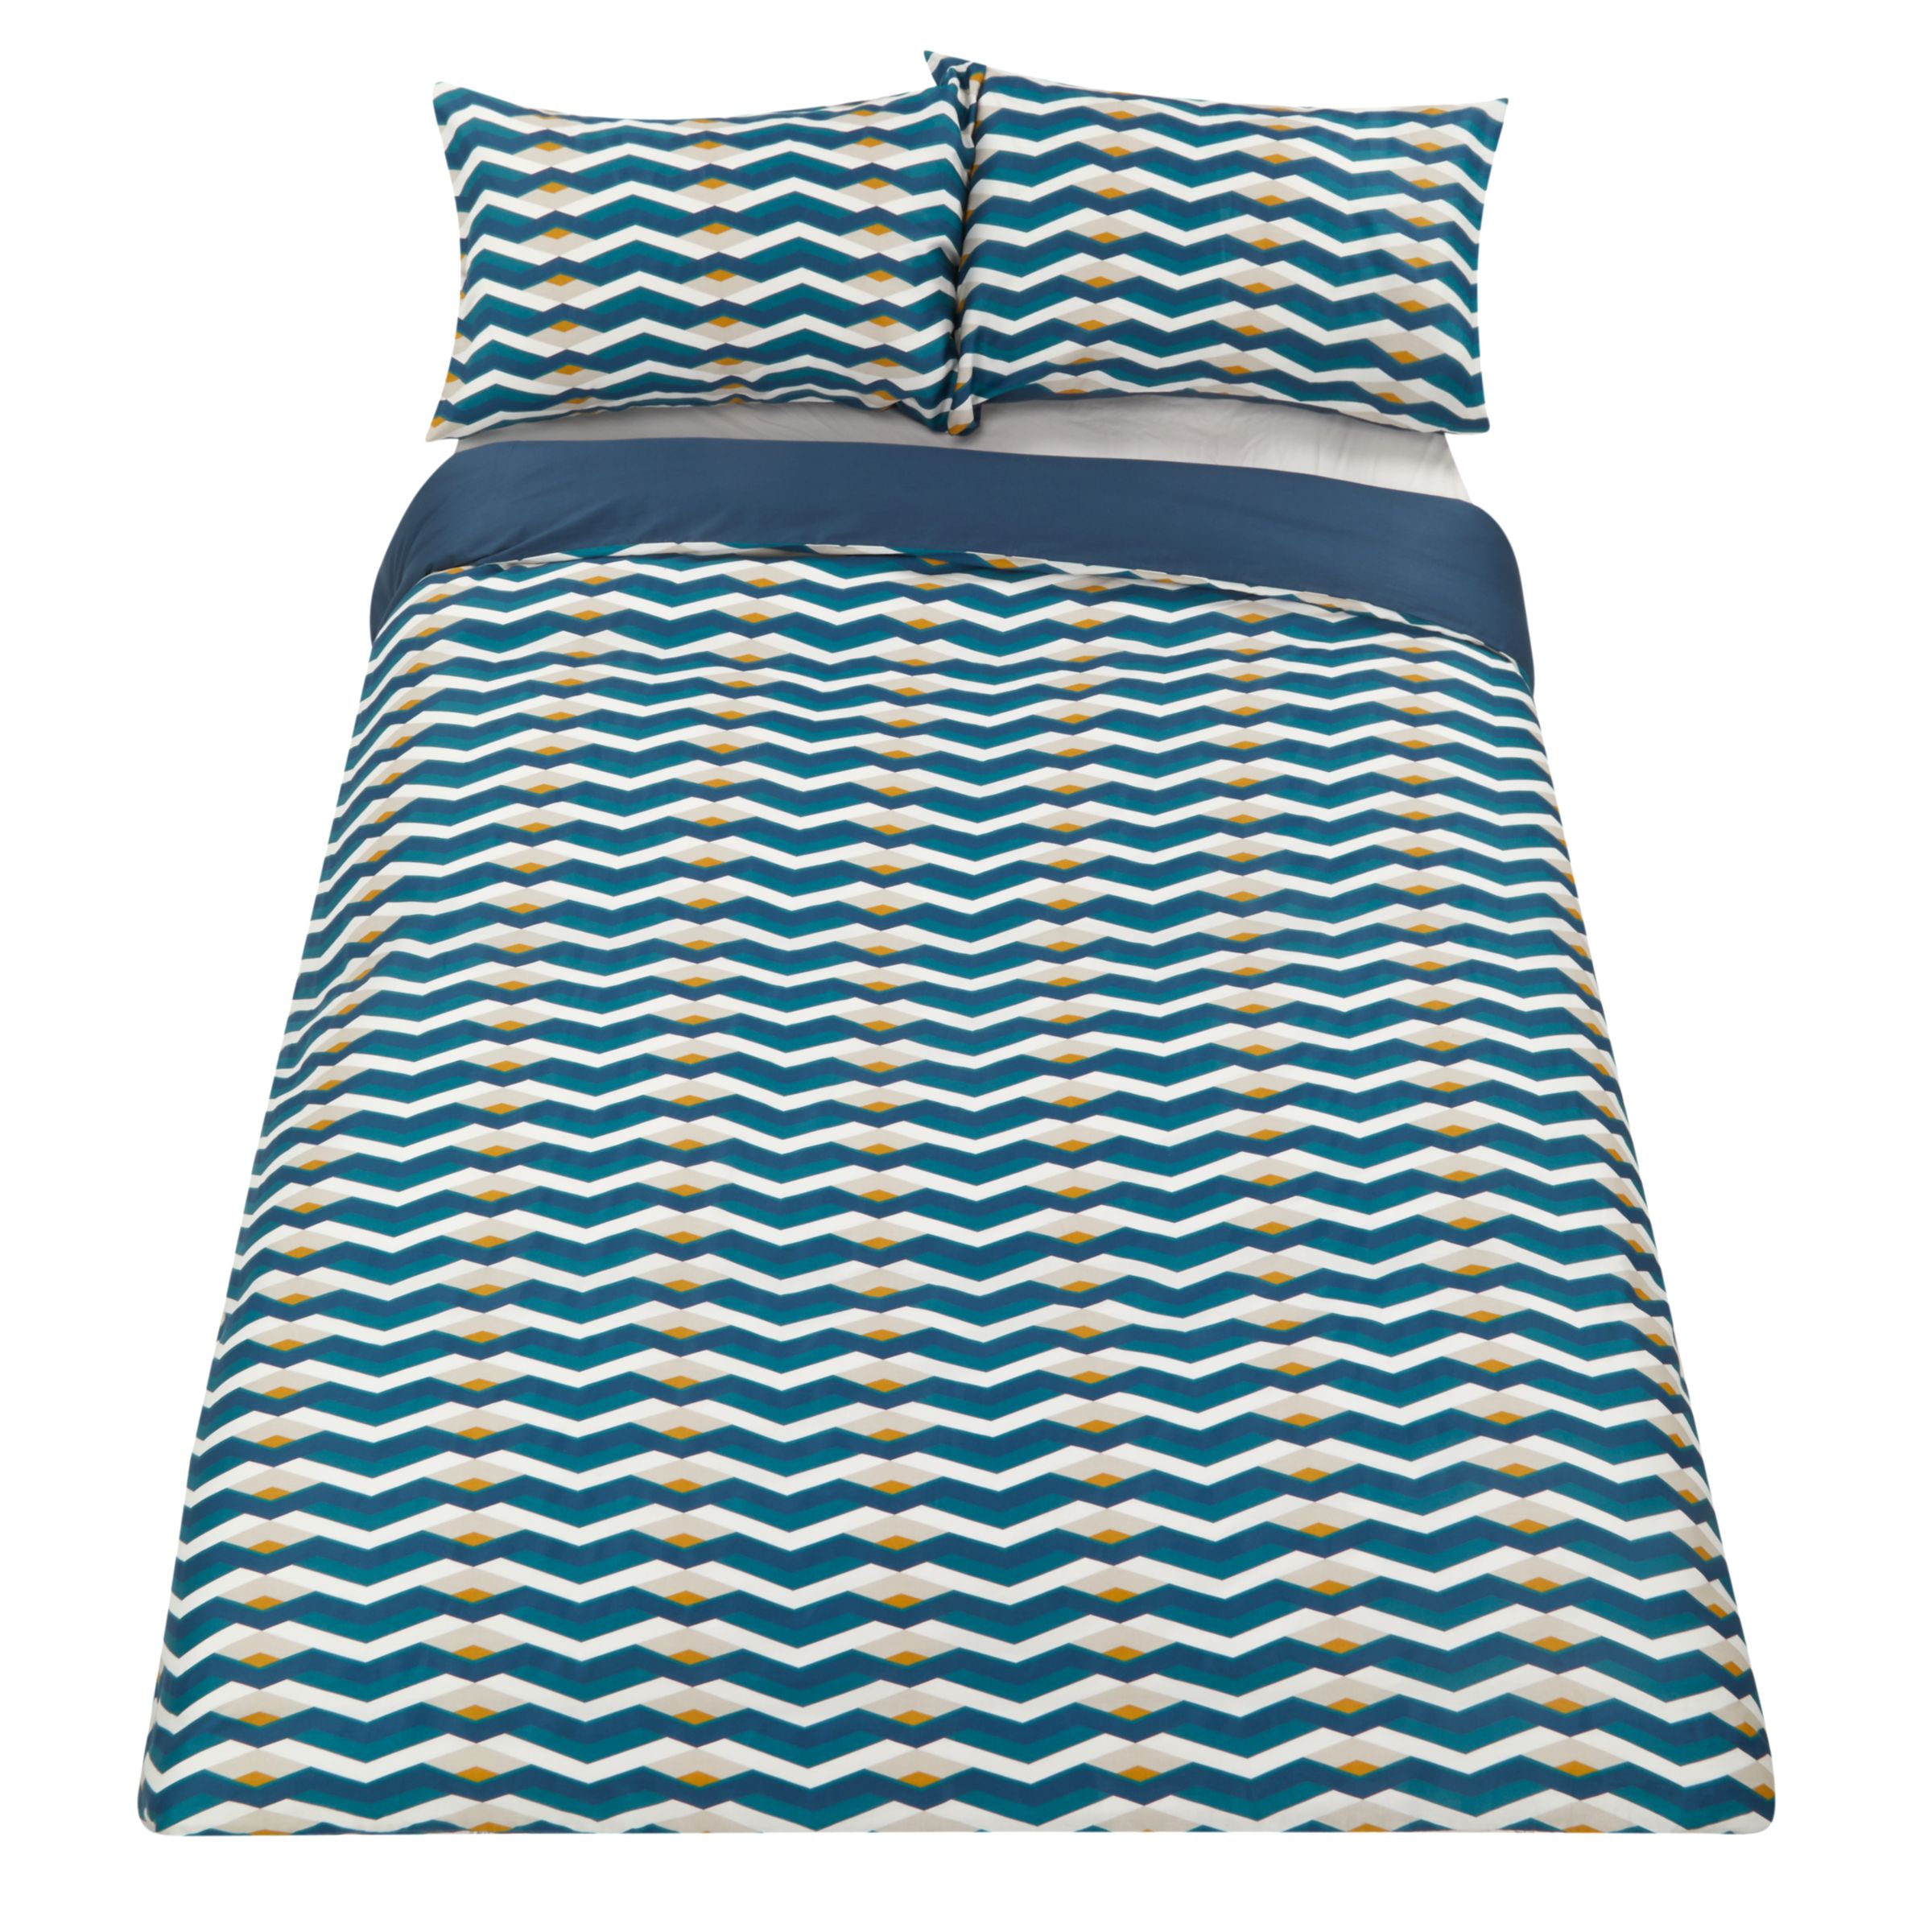 John Lewis Partners Soft And Silky Arezzo Duvet Cover Set Multi